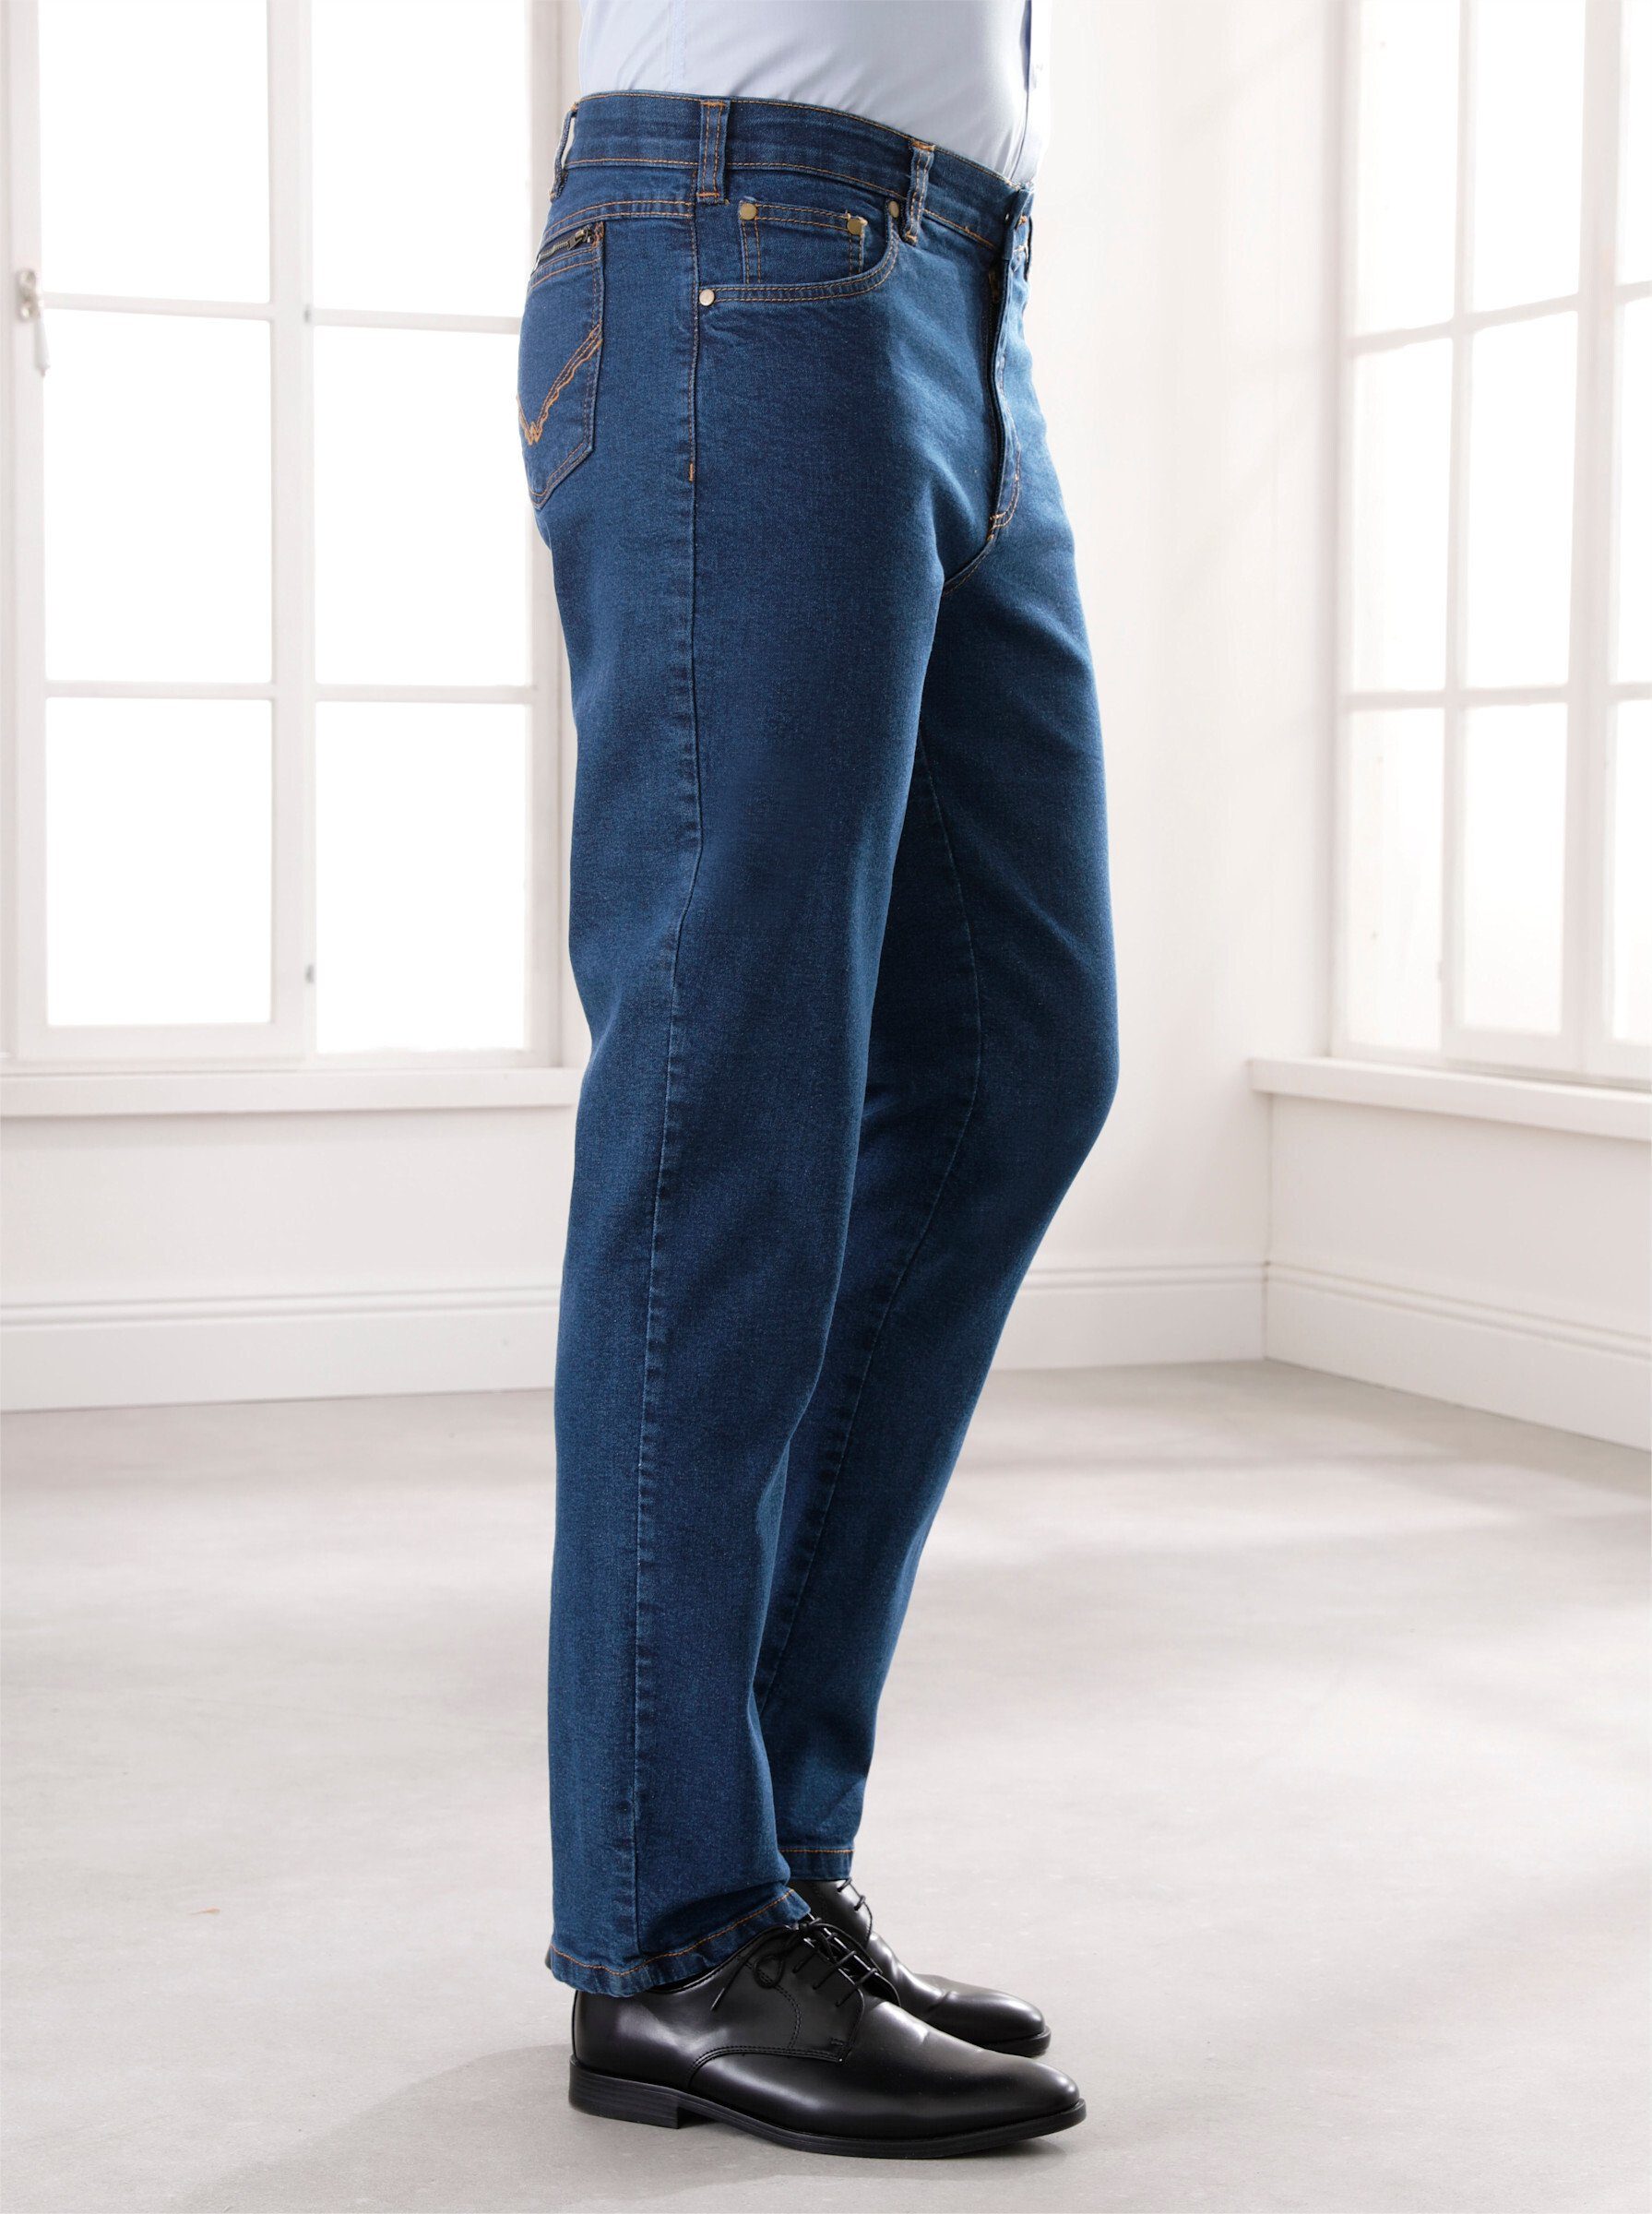 Sieh blue-stone-washed Bequeme Jeans an!